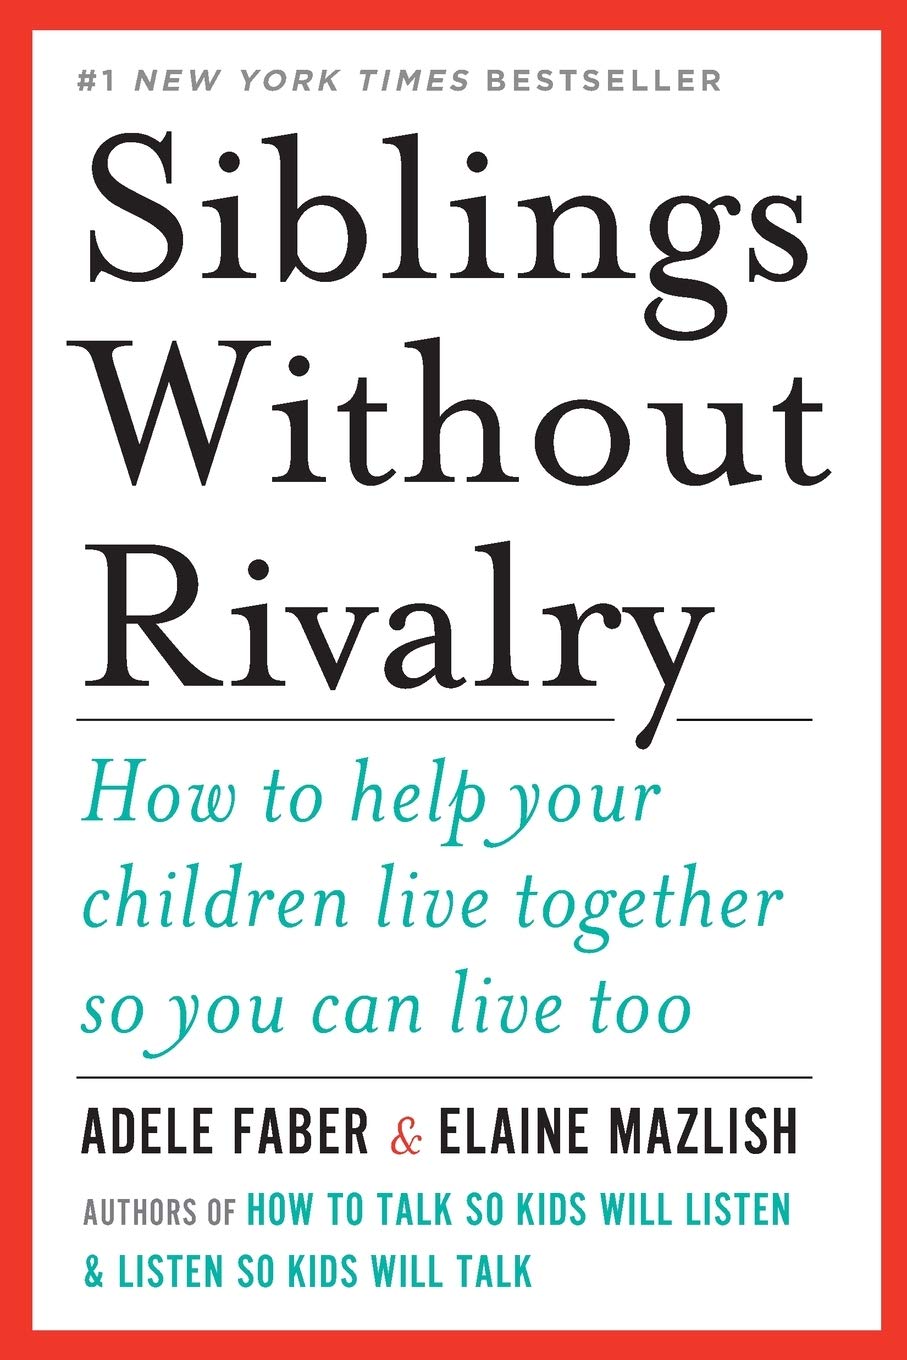 Siblings Without Rivalry by Adele Faber and Elaine Mazlish